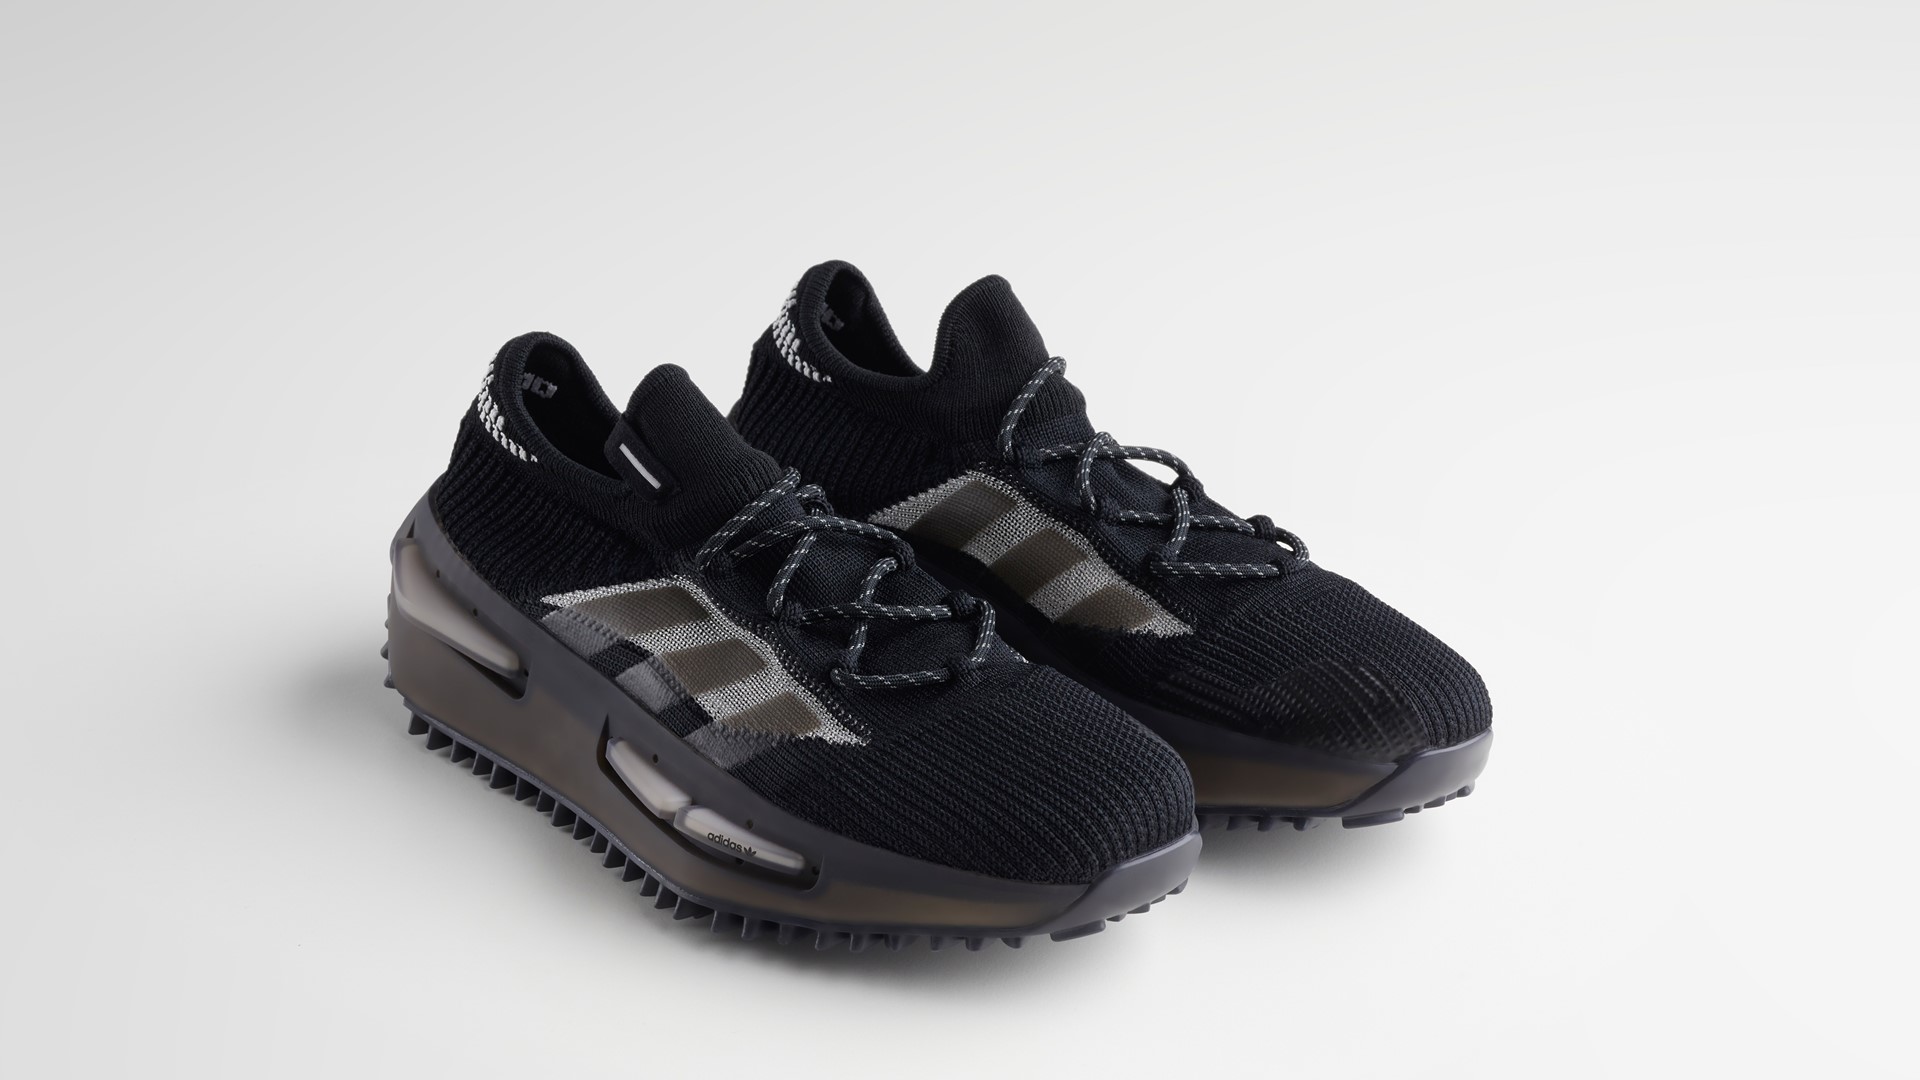 adidas Originals Launches a Brand New Black Colorway of the